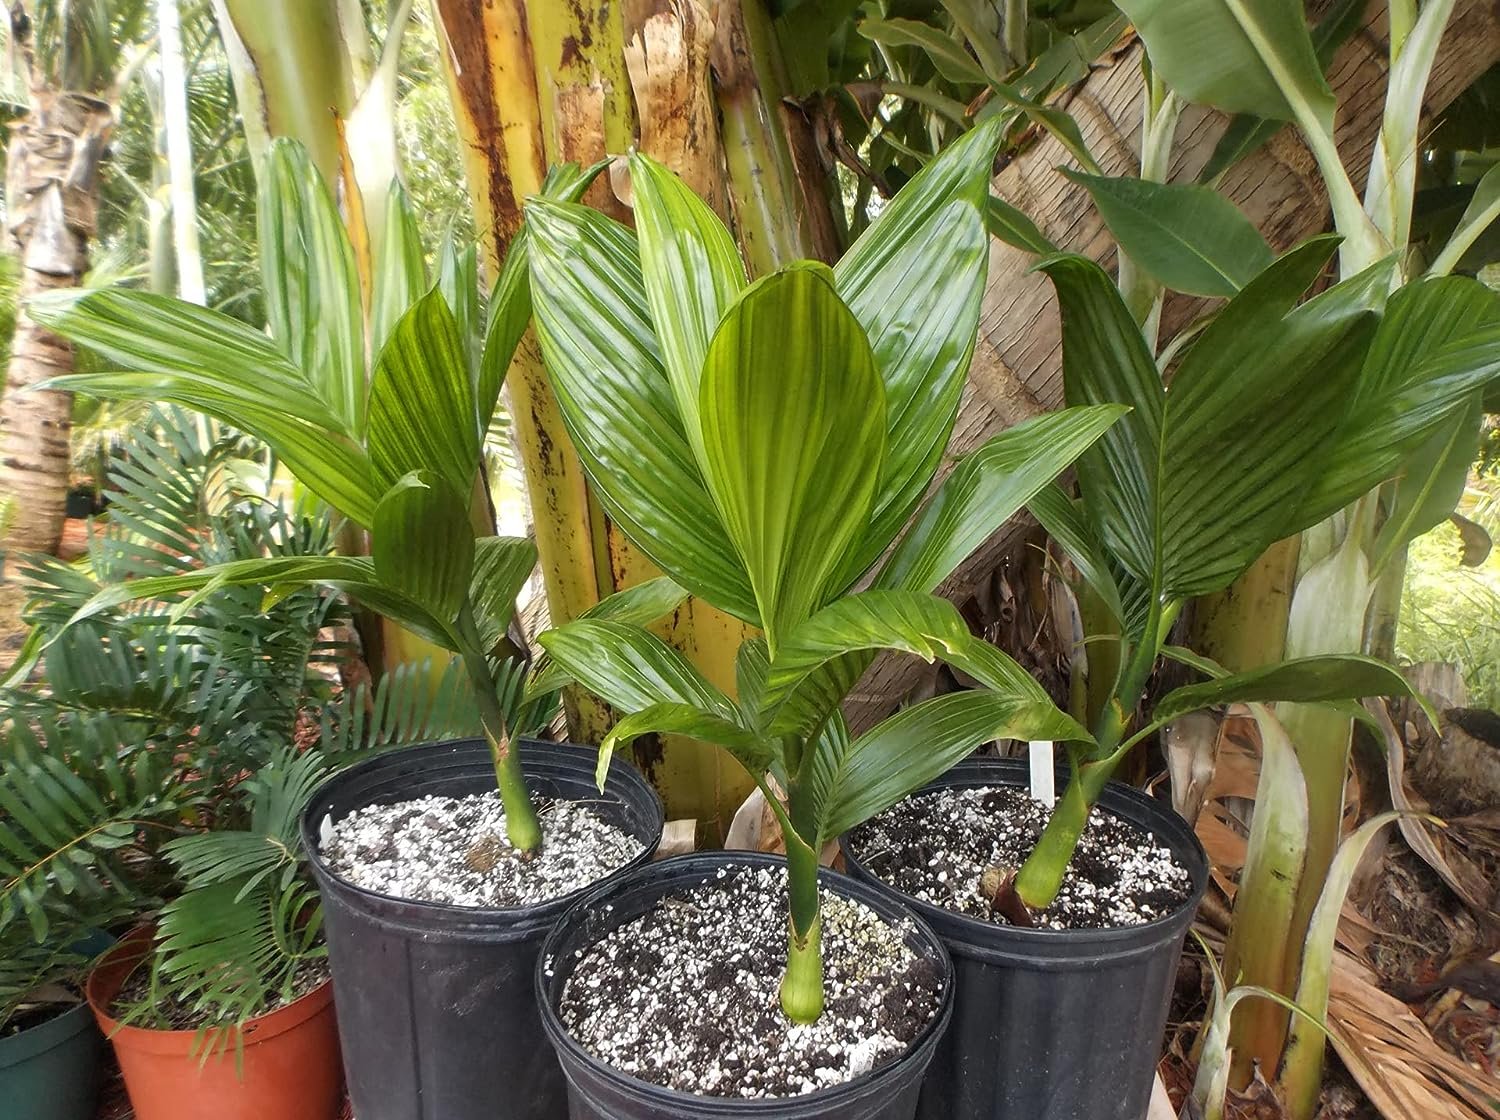 Dwarf Areca Catechu Palm - Live Plant in a 10 Inch Pot - Areca Catechu 'Dwarf' - Breathtaking Ornamental Palms from Florida for The Home and Patio - image 4 of 5